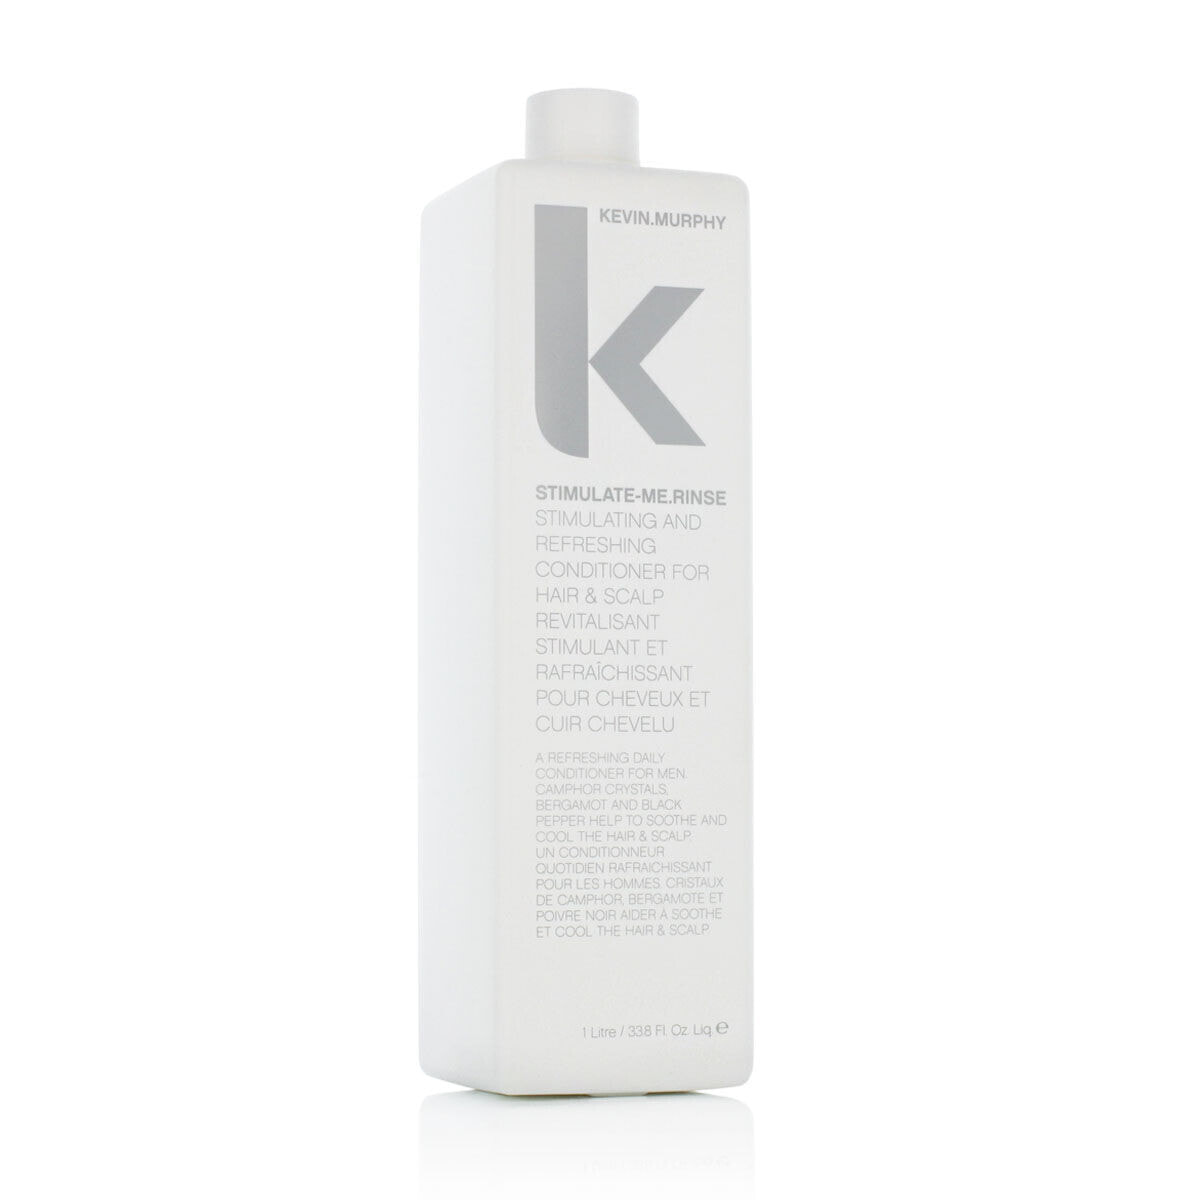 Revitalising Conditioner Kevin Murphy Stimulate-Me Rinse 1 L